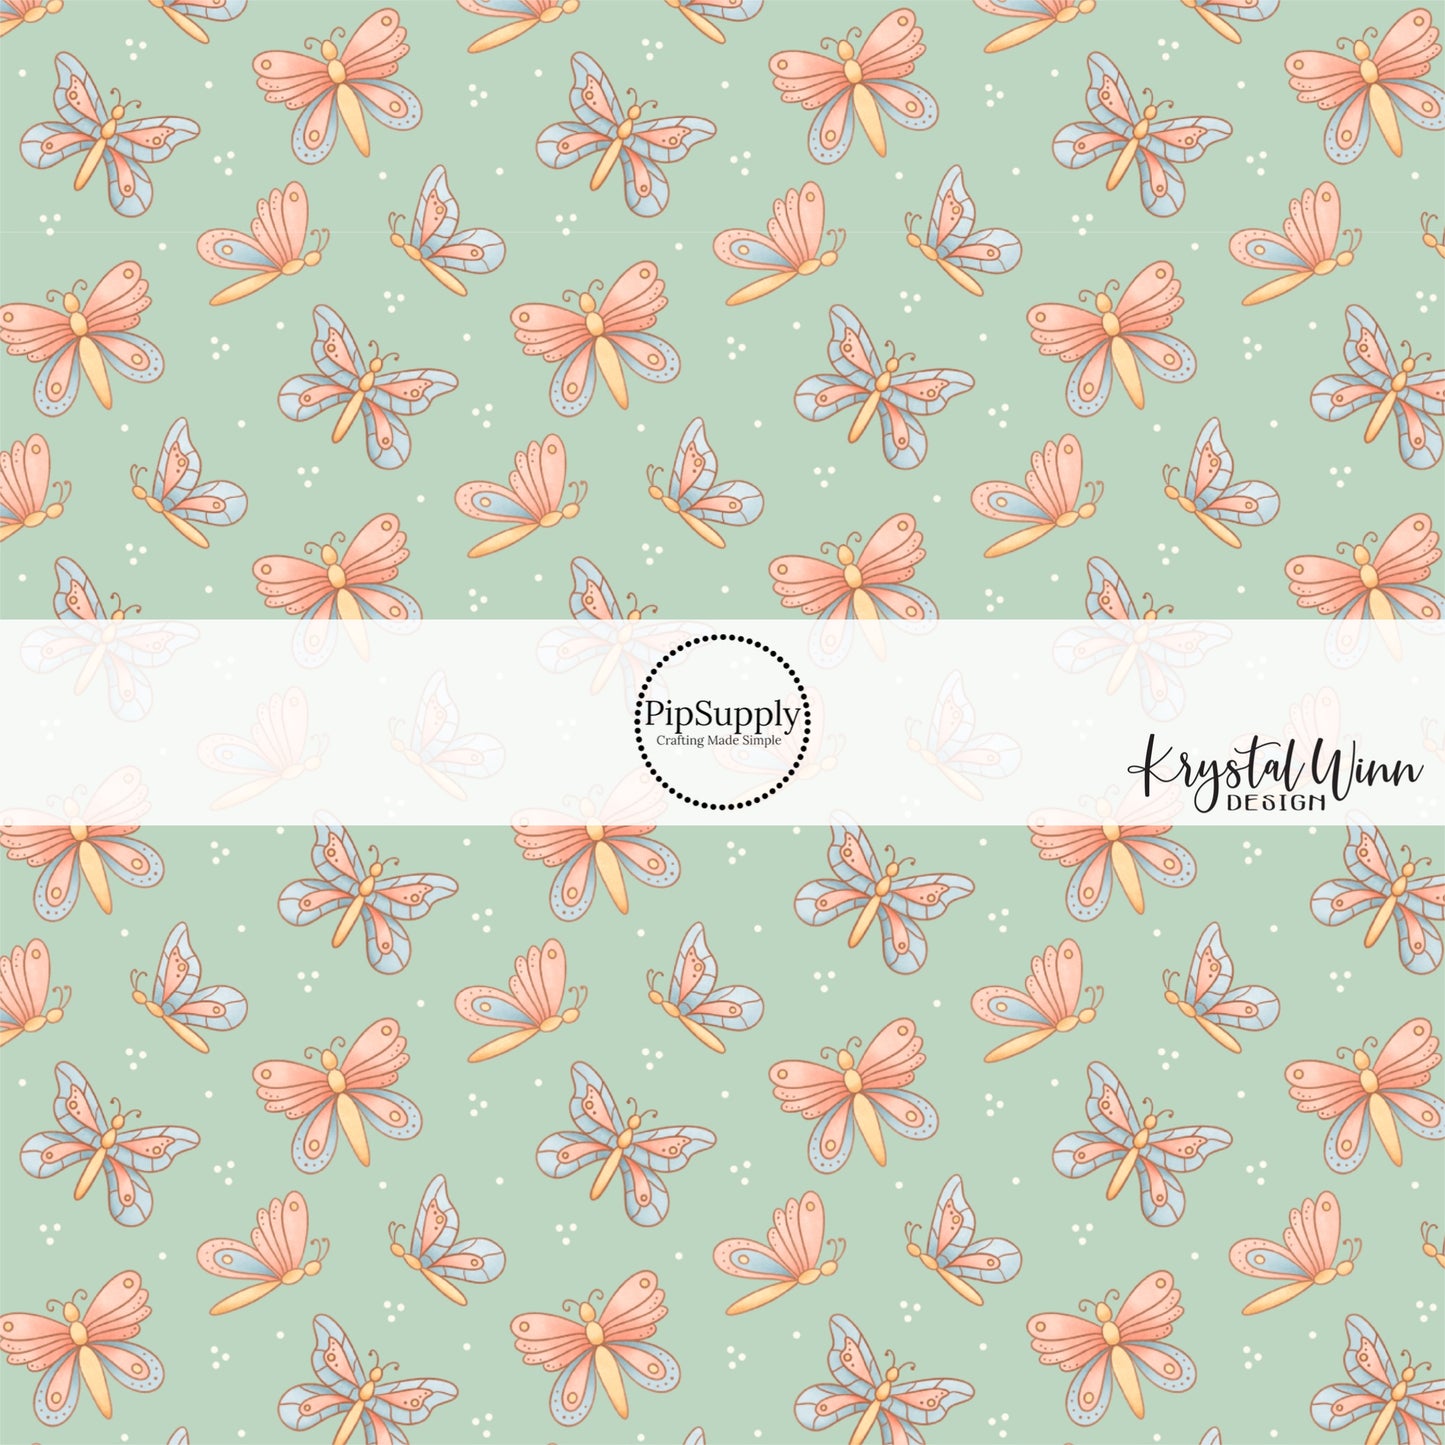 flying blue and pink butterflies on seafoam bow strips